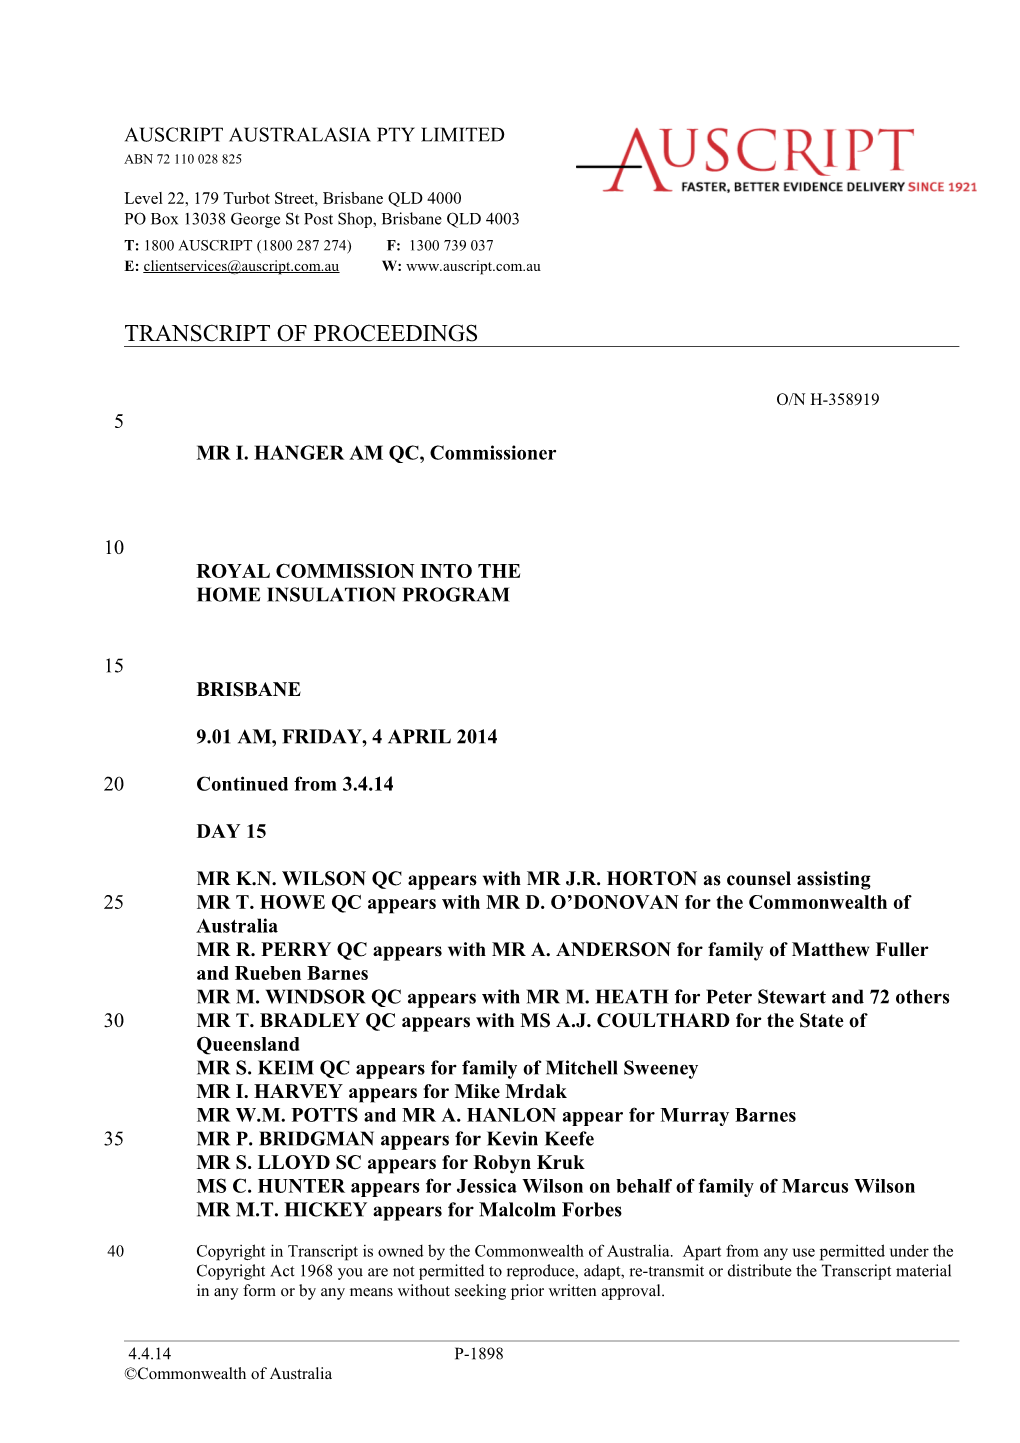 Transcript of Proceedings - 4 April 2014 - Royal Commission Into the Home Insulation Program